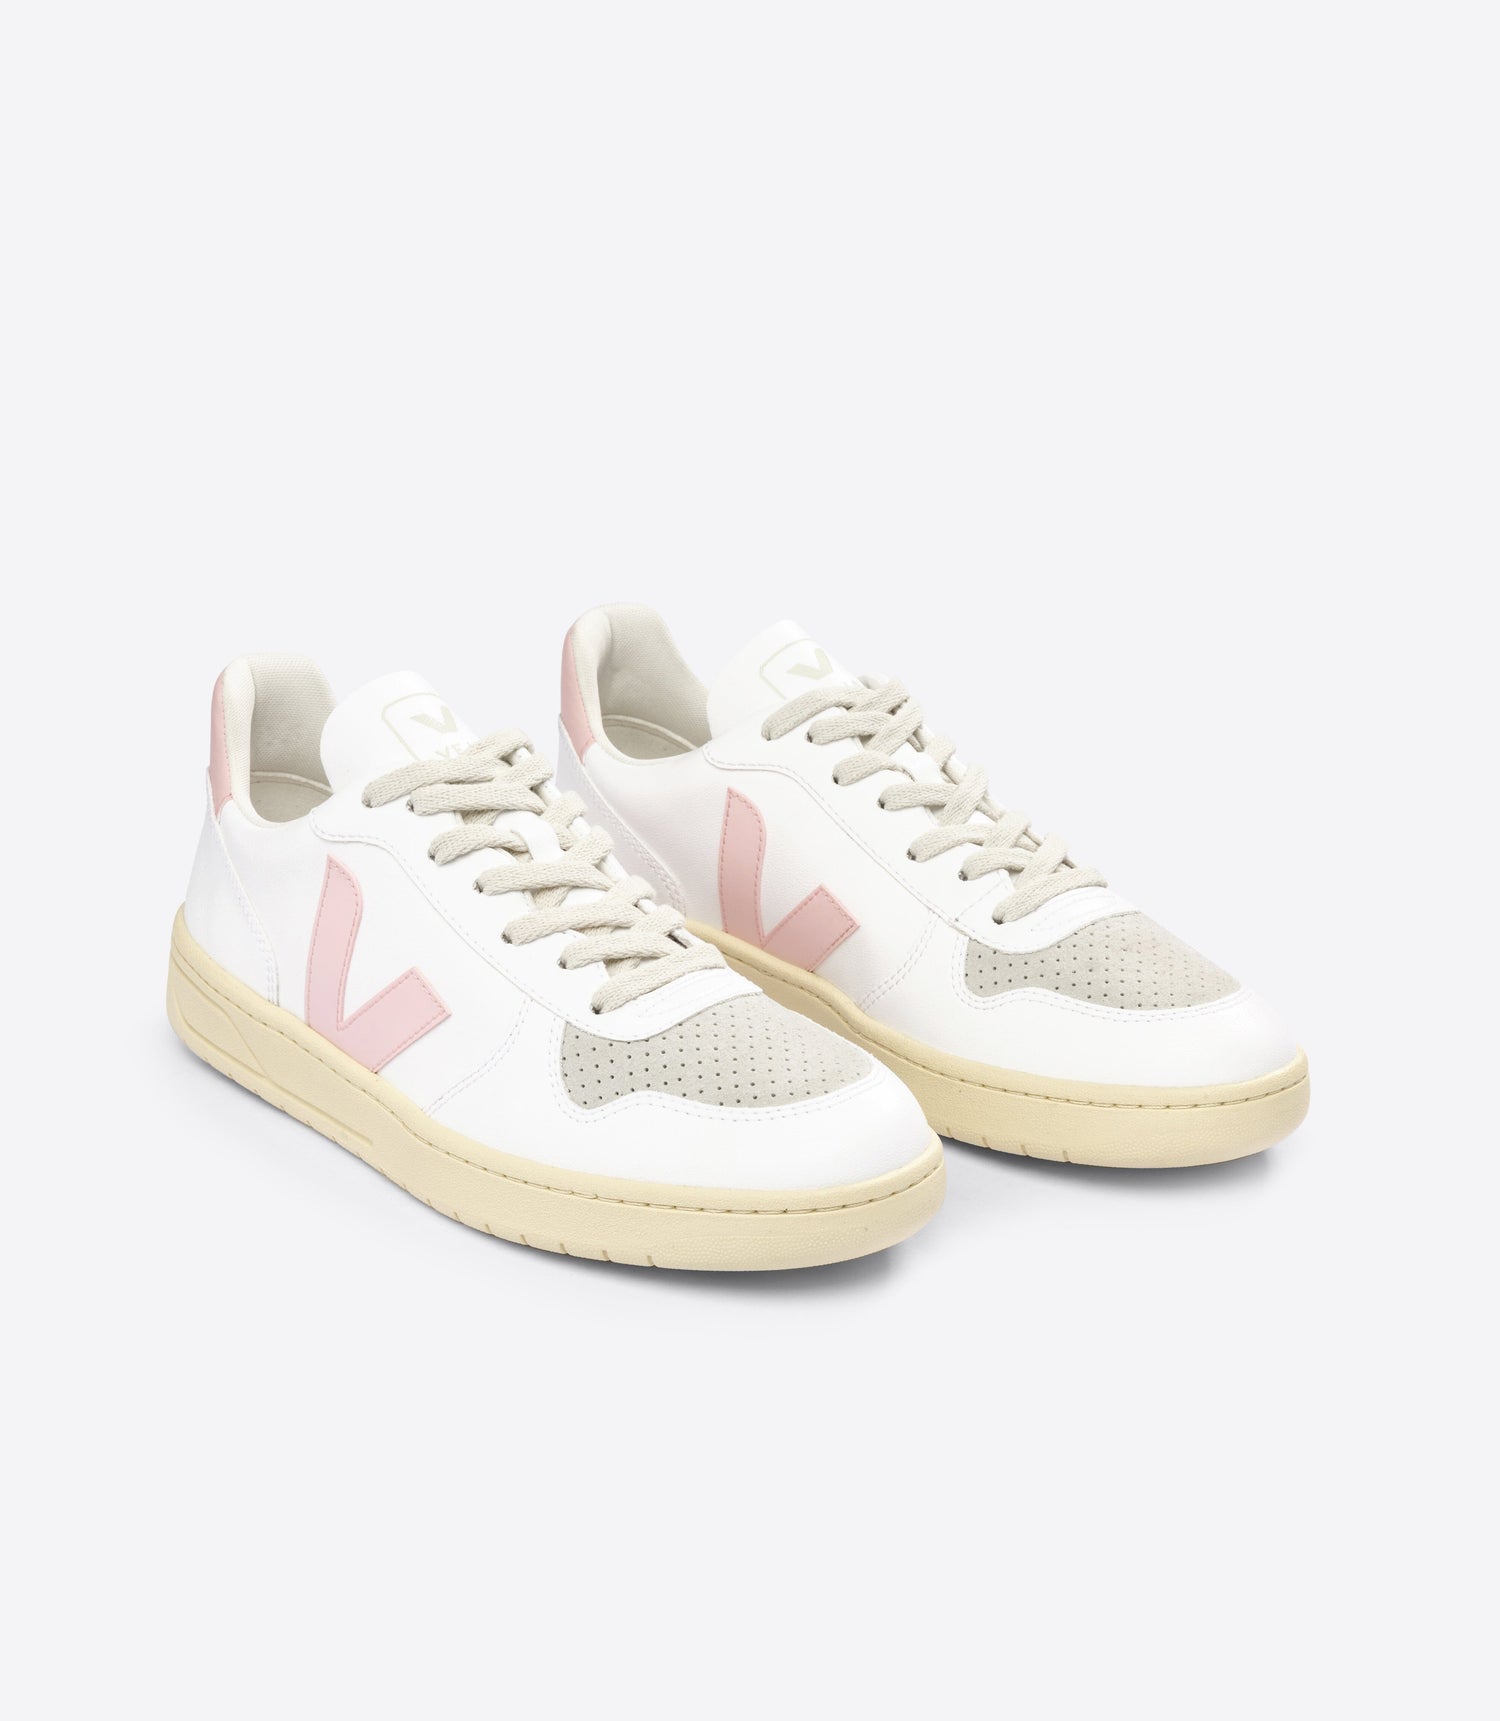 Veja - W's V-10 CWL - Cotton Worked as Leather - Weekendbee - sustainable sportswear